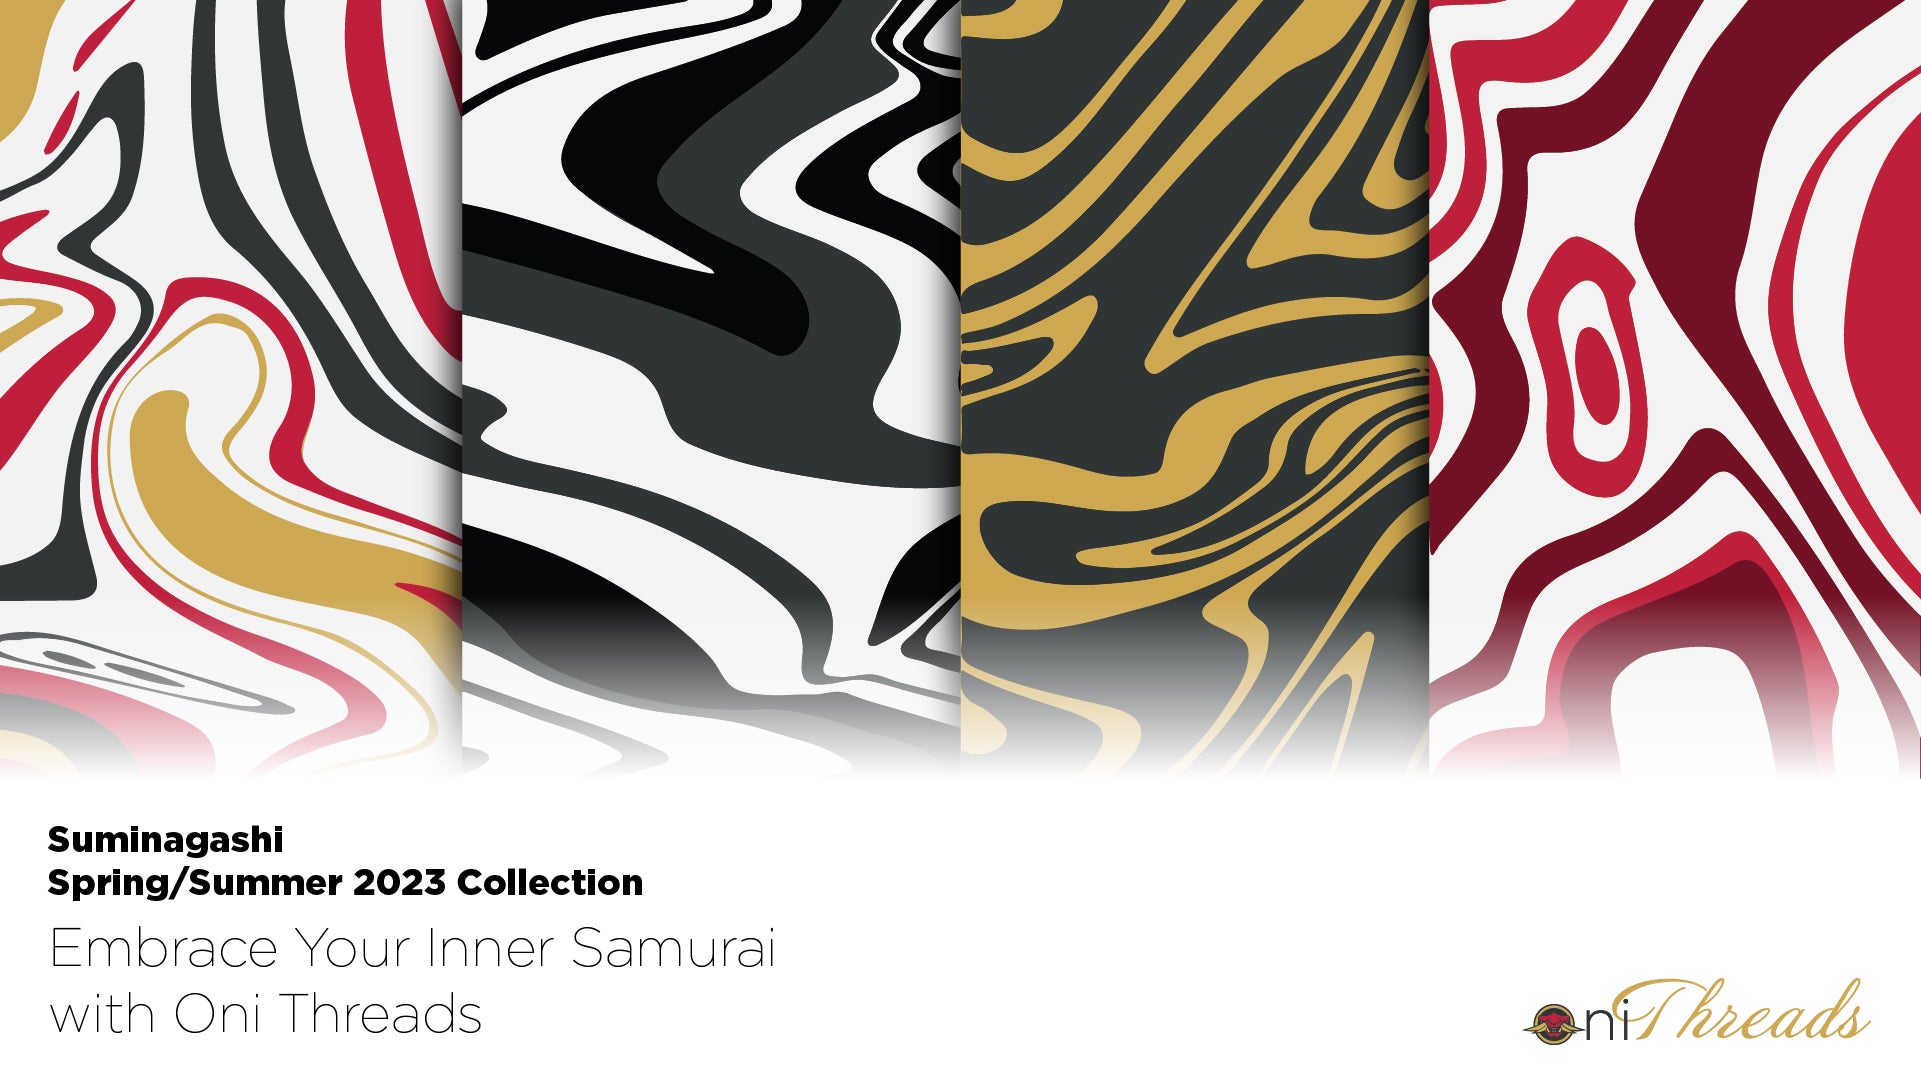 Suminagashi Spring/Summer 2023 Collection: Embrace Your Inner Samurai with Oni Threads